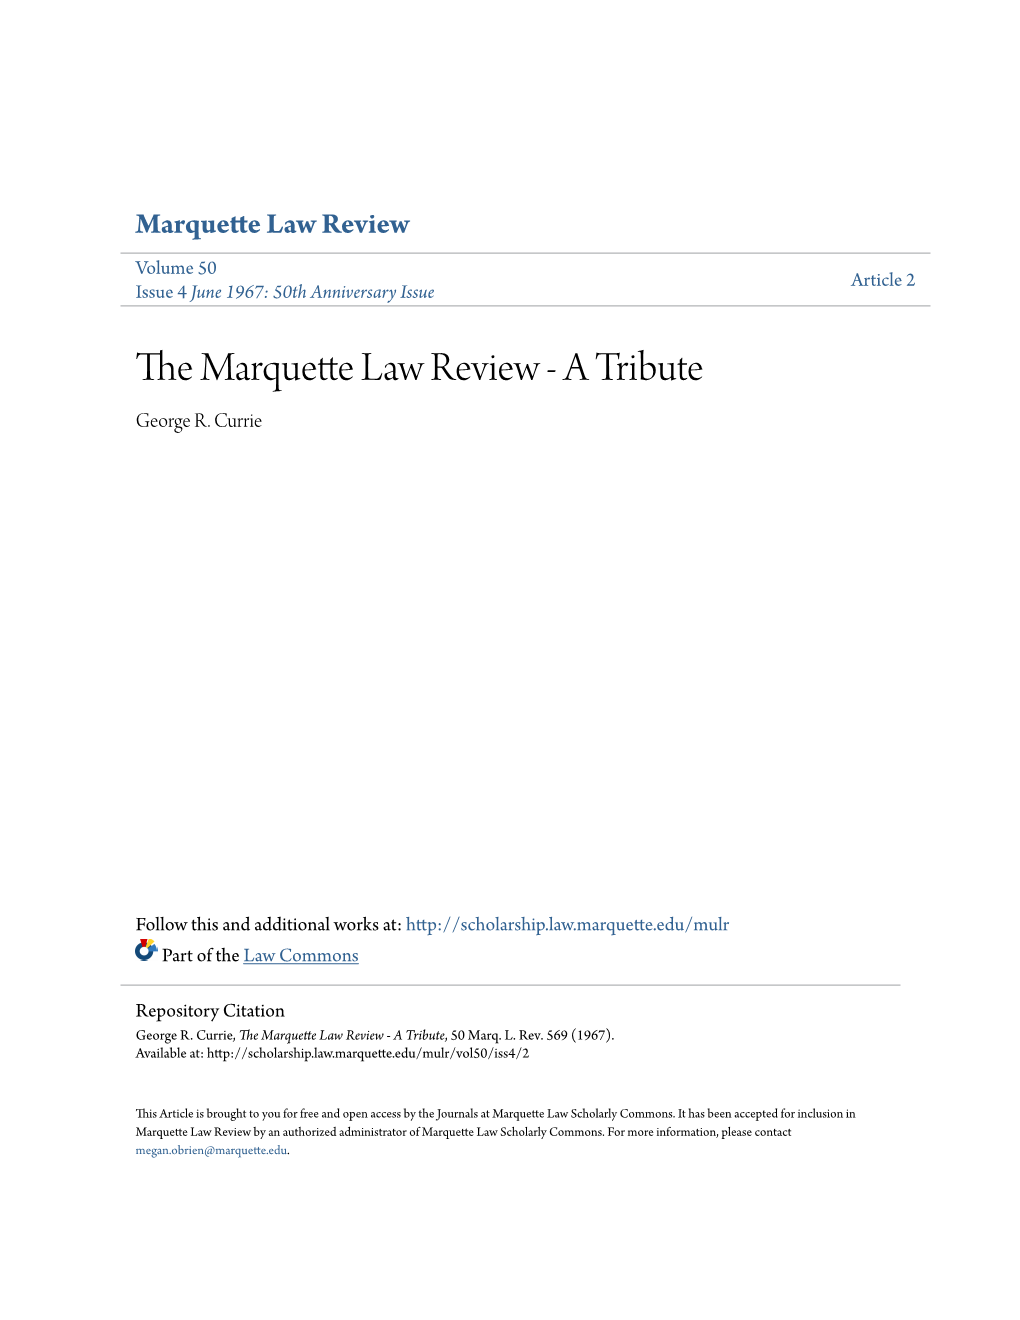 The Marquette Law Review - a Tribute, 50 Marq